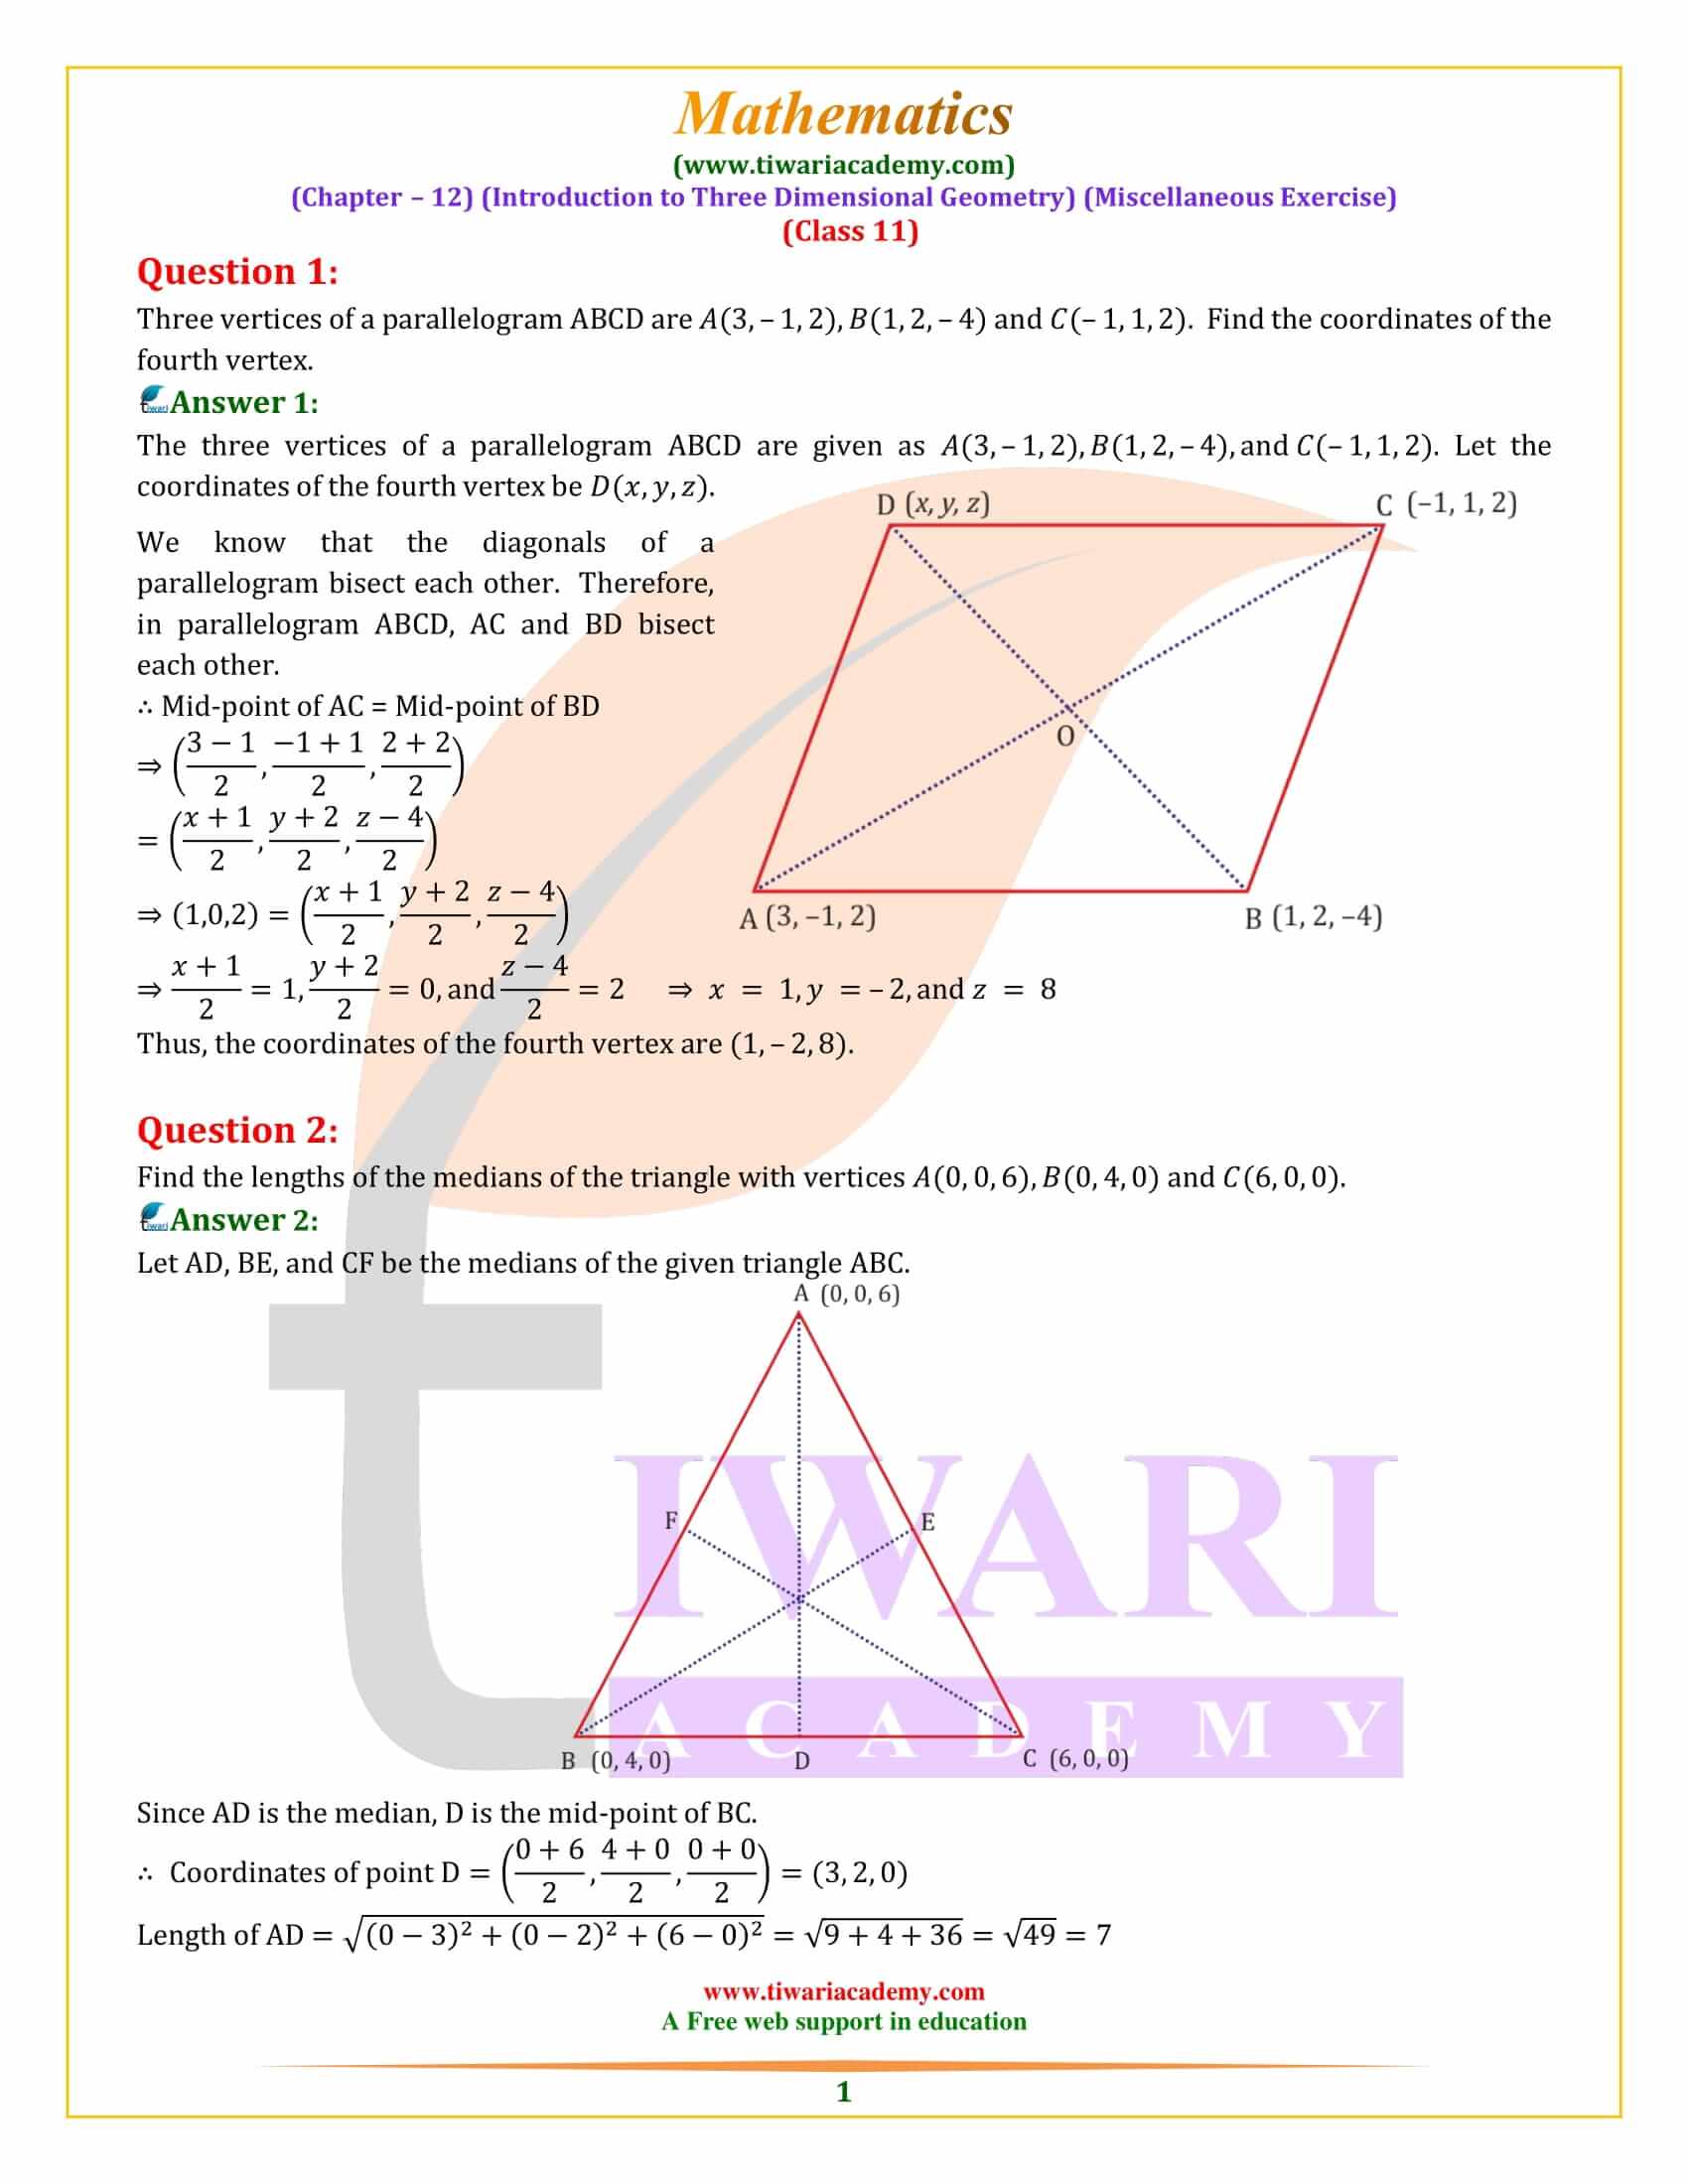 NCERT Solutions for Class 11 Maths Chapter 12 Miscellaneous Exercise